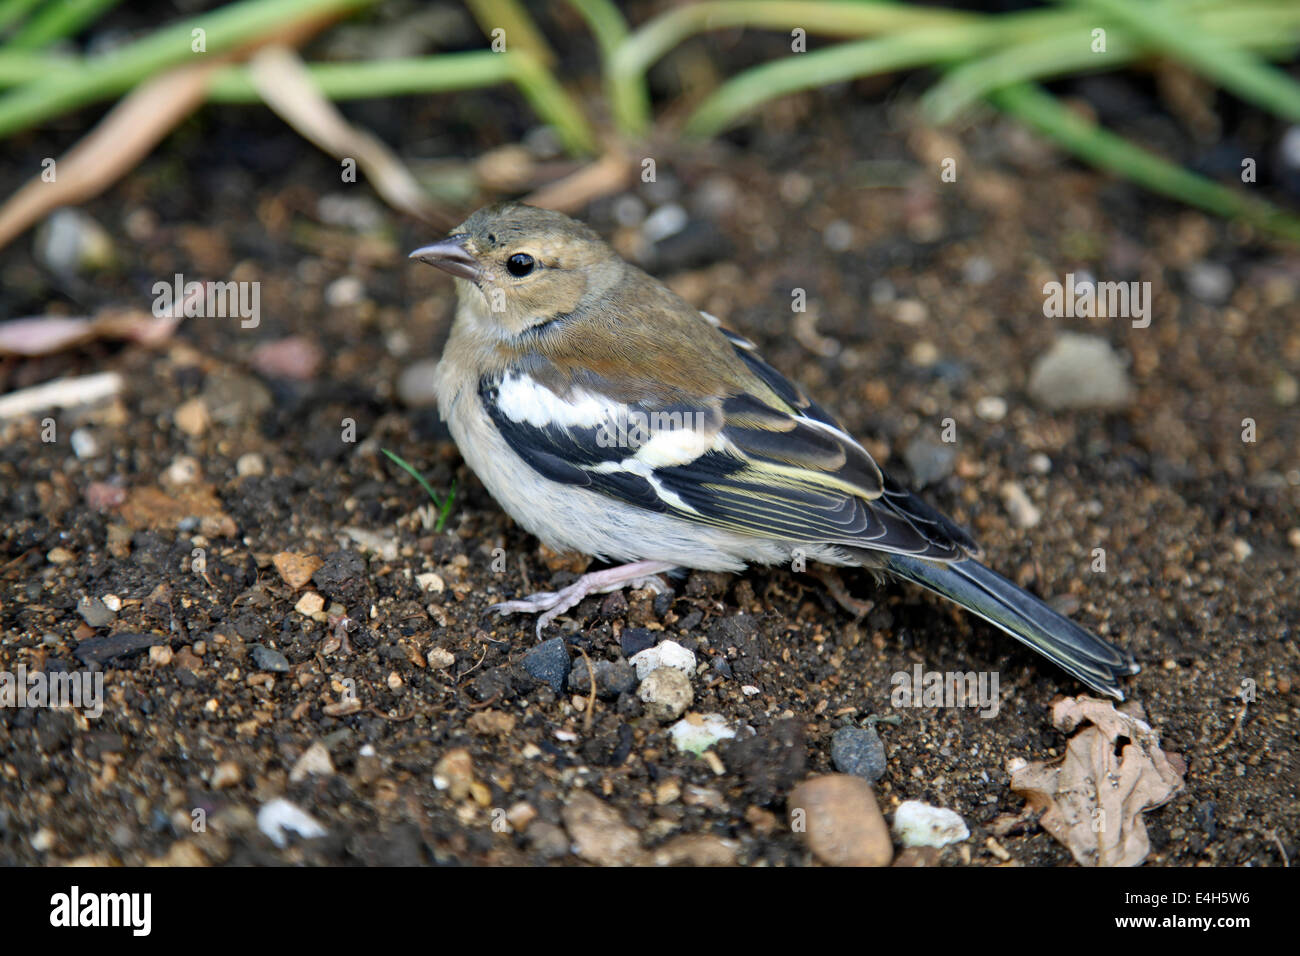 Female Chaffinch at rest in a garden Stock Photo